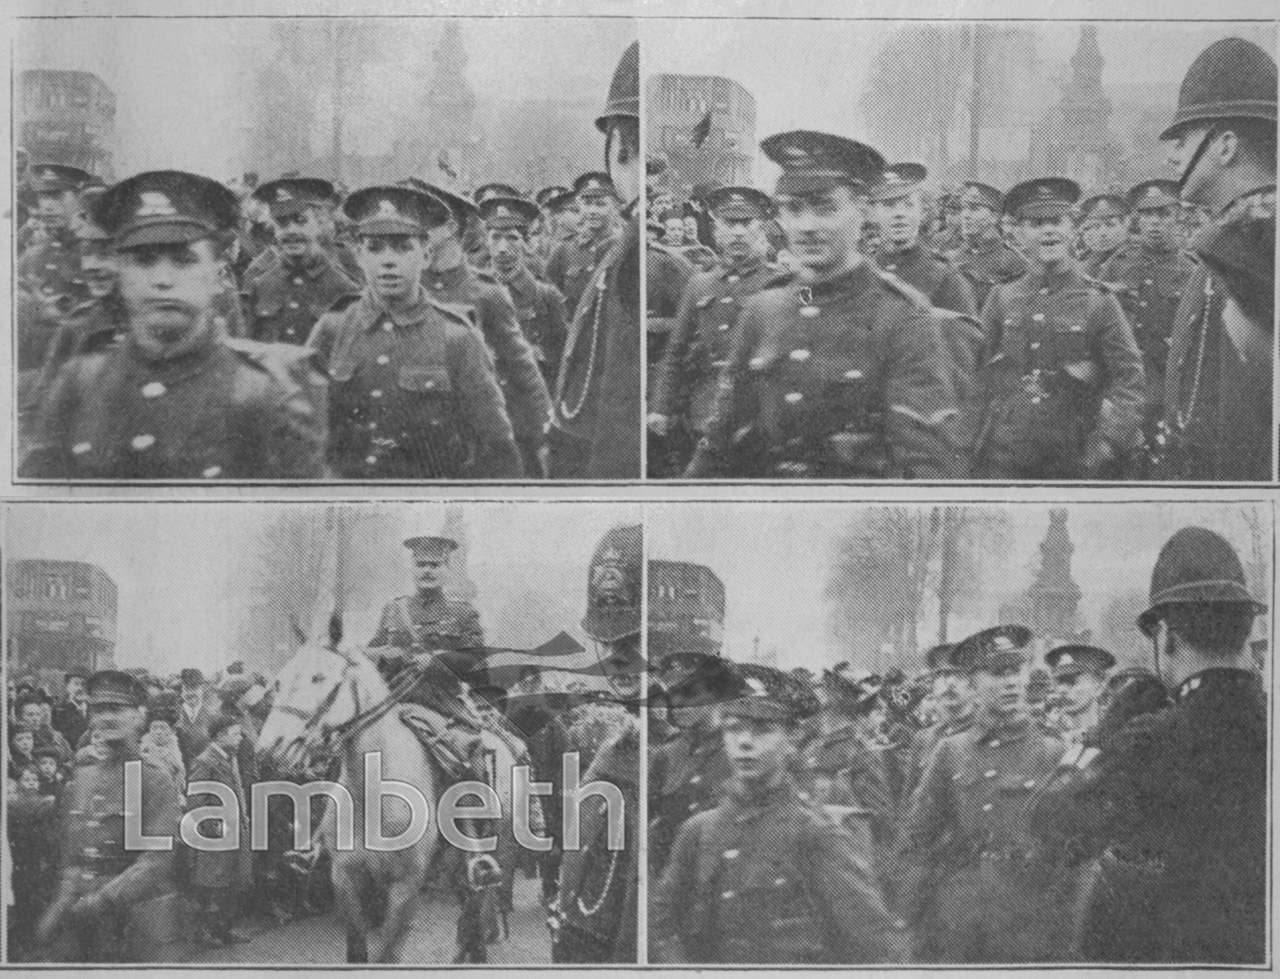 LAMBETH RECRUITS MARCHING OUTSIDE TOWN HALL, WWI